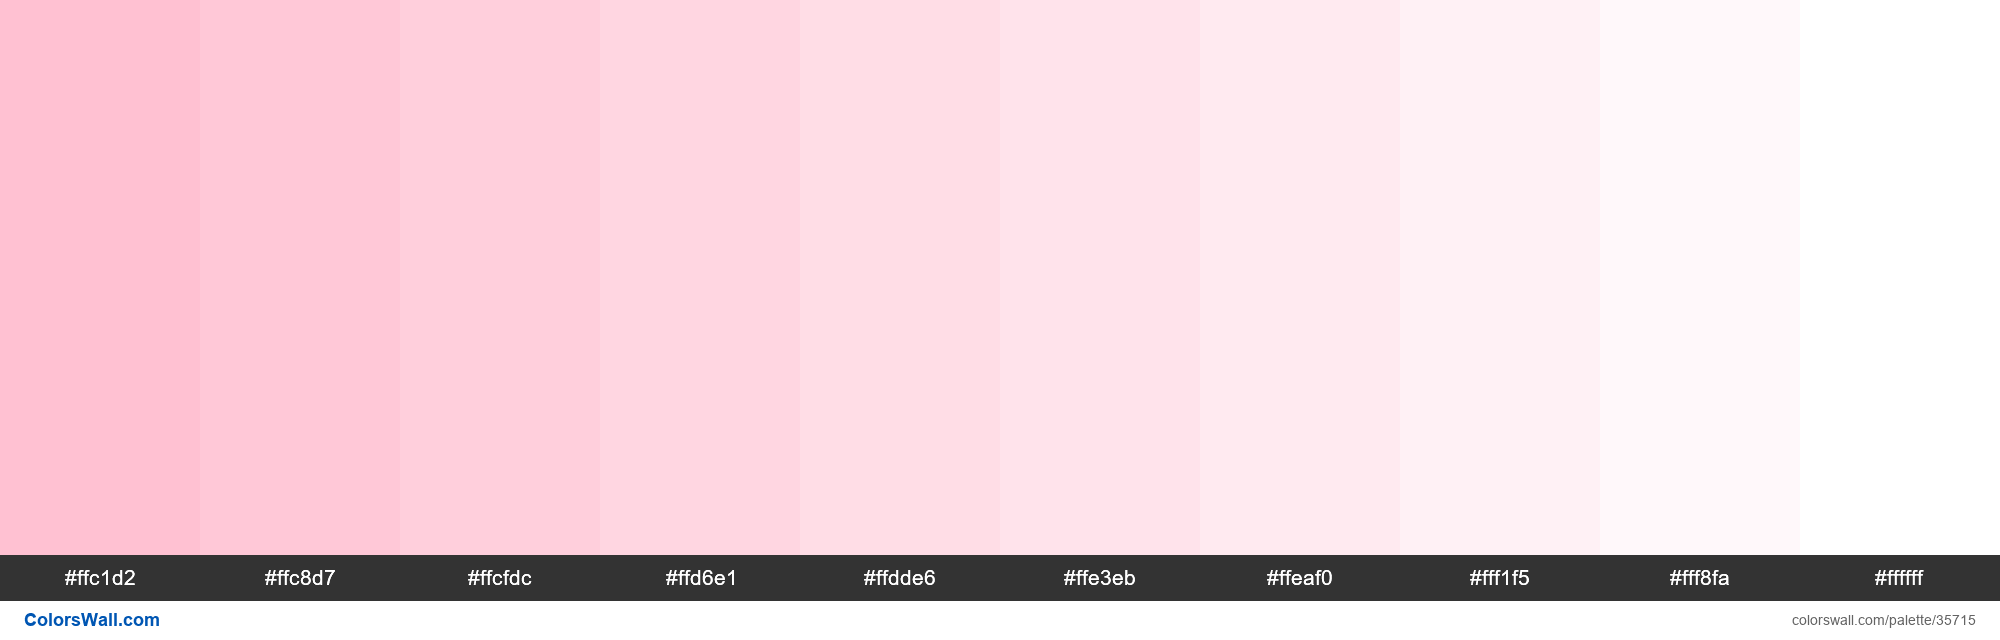 Tints XKCD Color pastel pink #ffbacd hex colors palette - ColorsWall